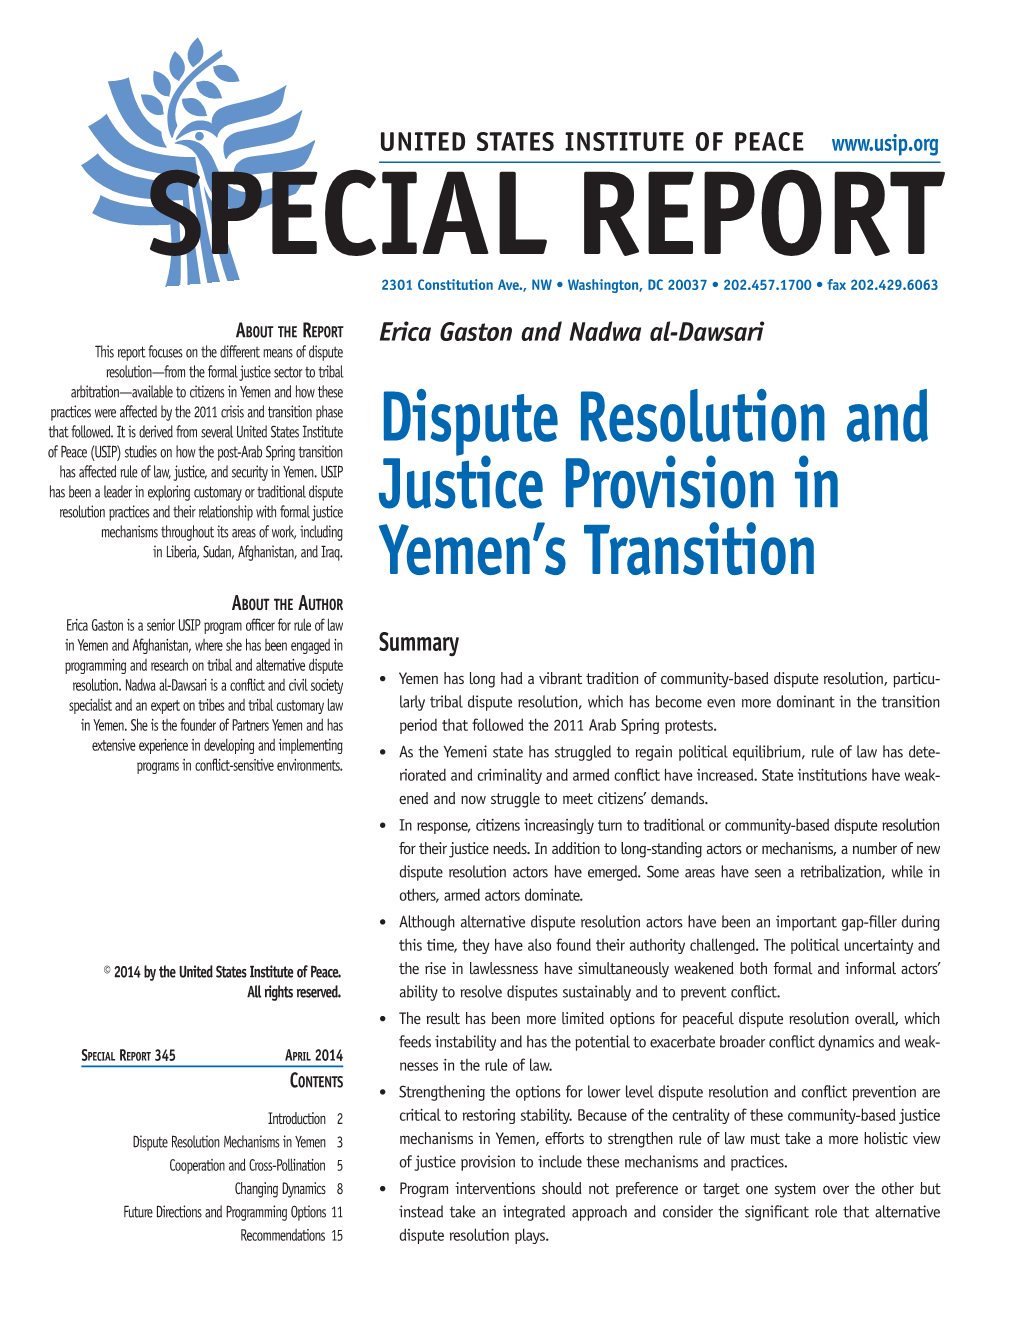 Dispute Resolution and Justice Provision in Yemen's Transition